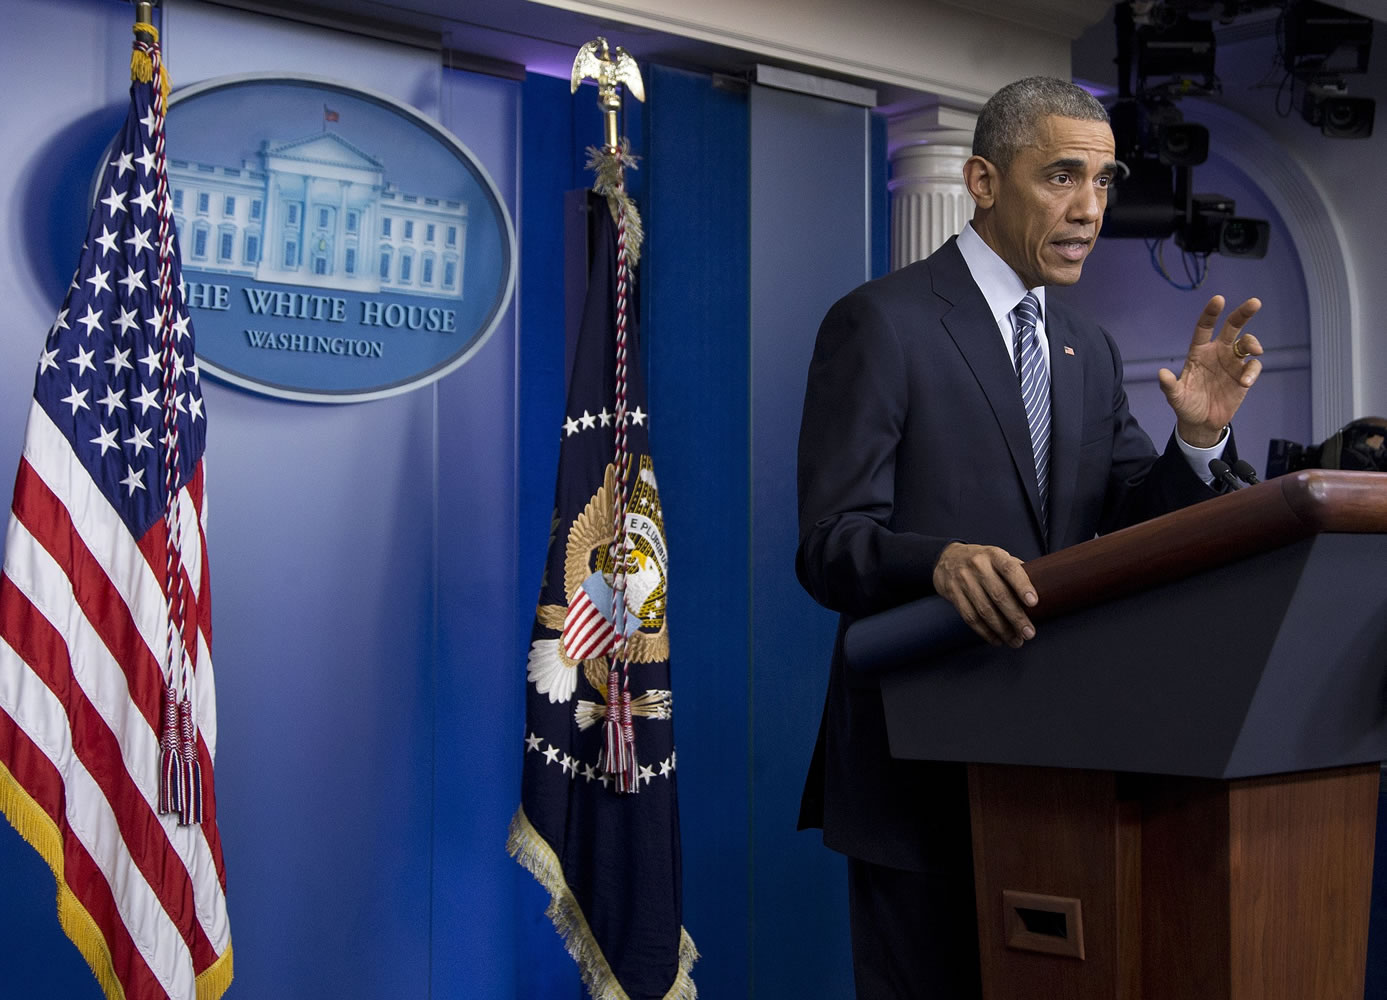 President Barack Obama speaks in the Brady Press Briefing Room at the White House in Washington on Monday after the Ferguson grand jury decided not to indict police officer Darren Wilson in the shooting death of Michael Brown.